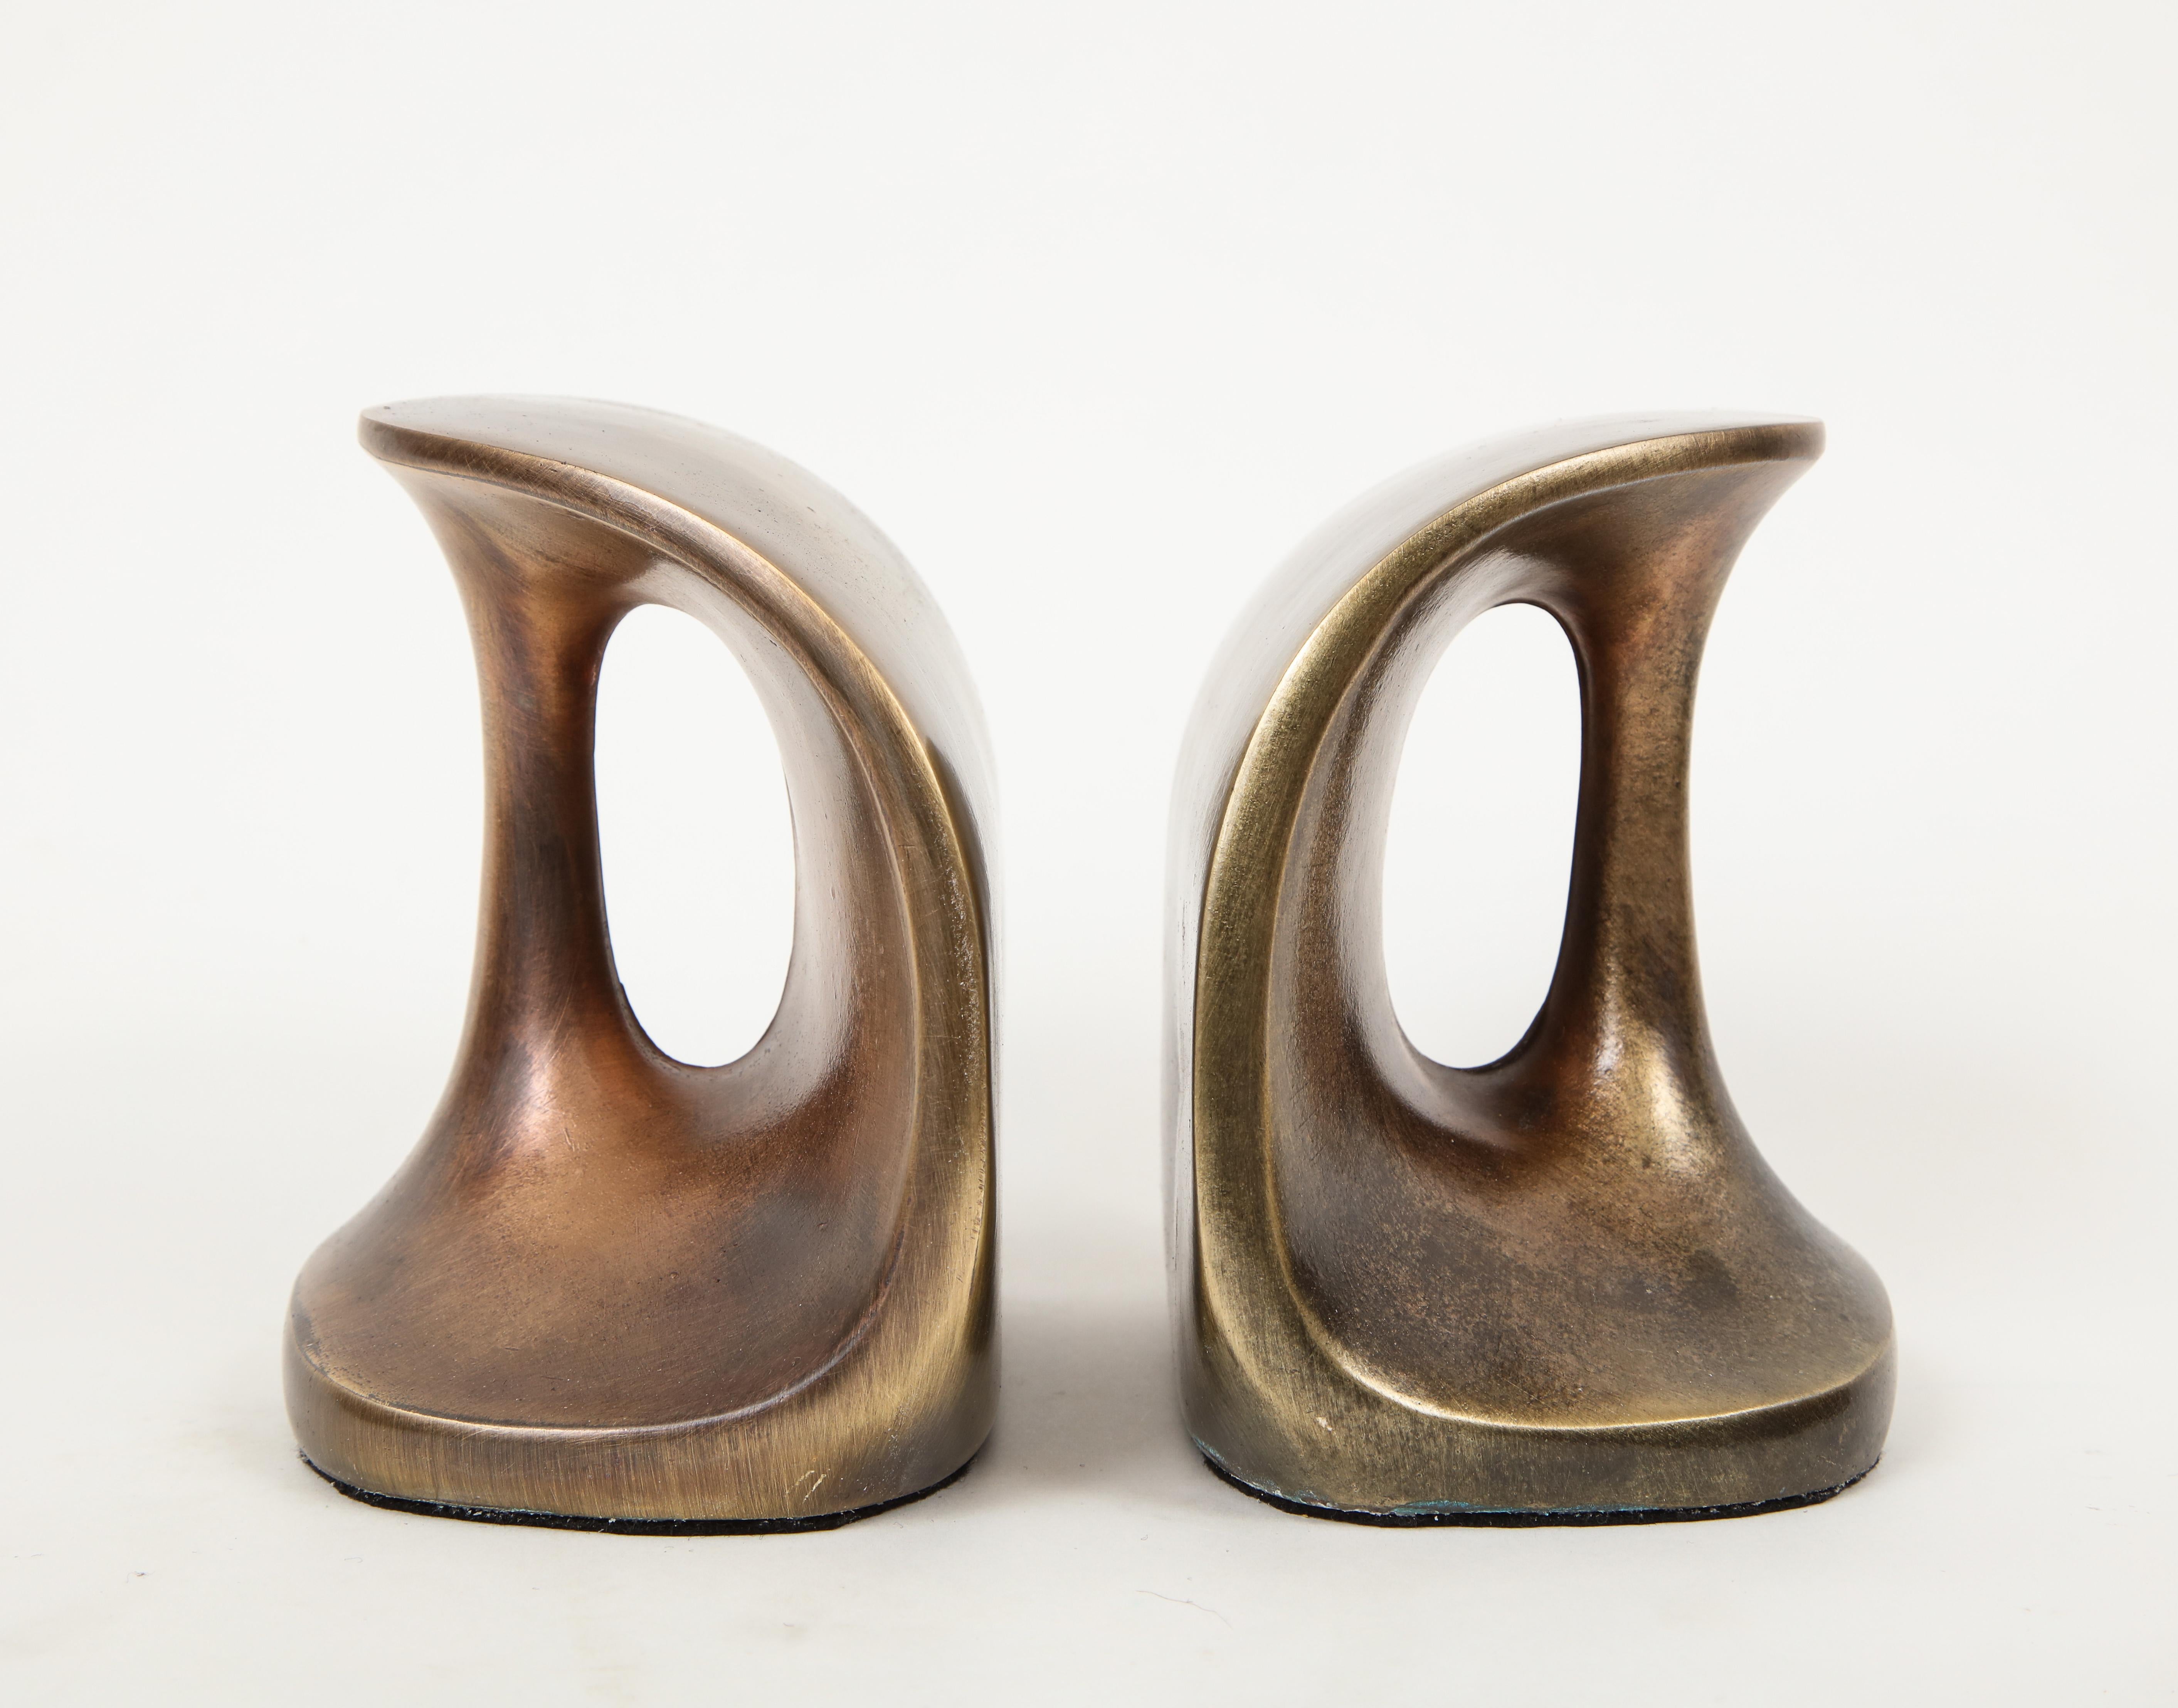 Pair of modernist bronze bookends featuring a seductive curve and open handle.